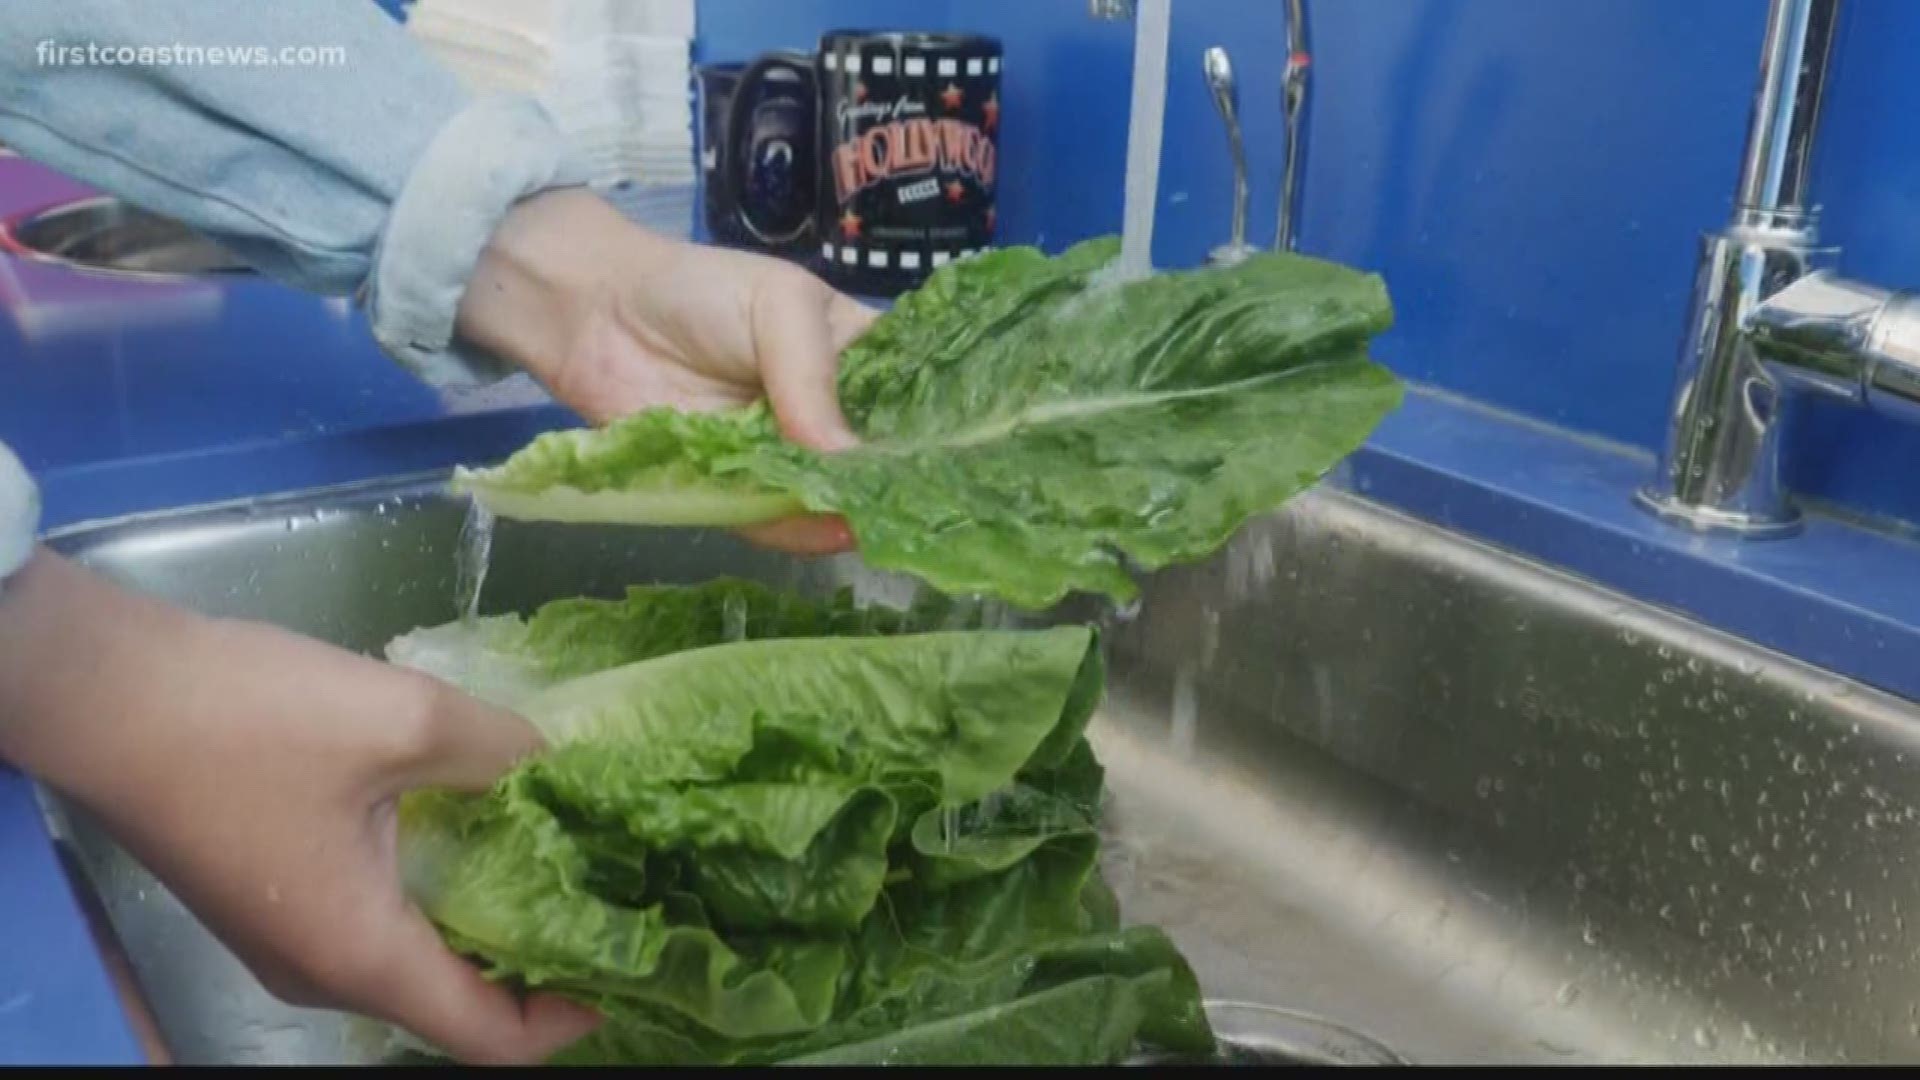 Red leaf and green leaf lettuce have been recalled due to a possible E. coli contamination.